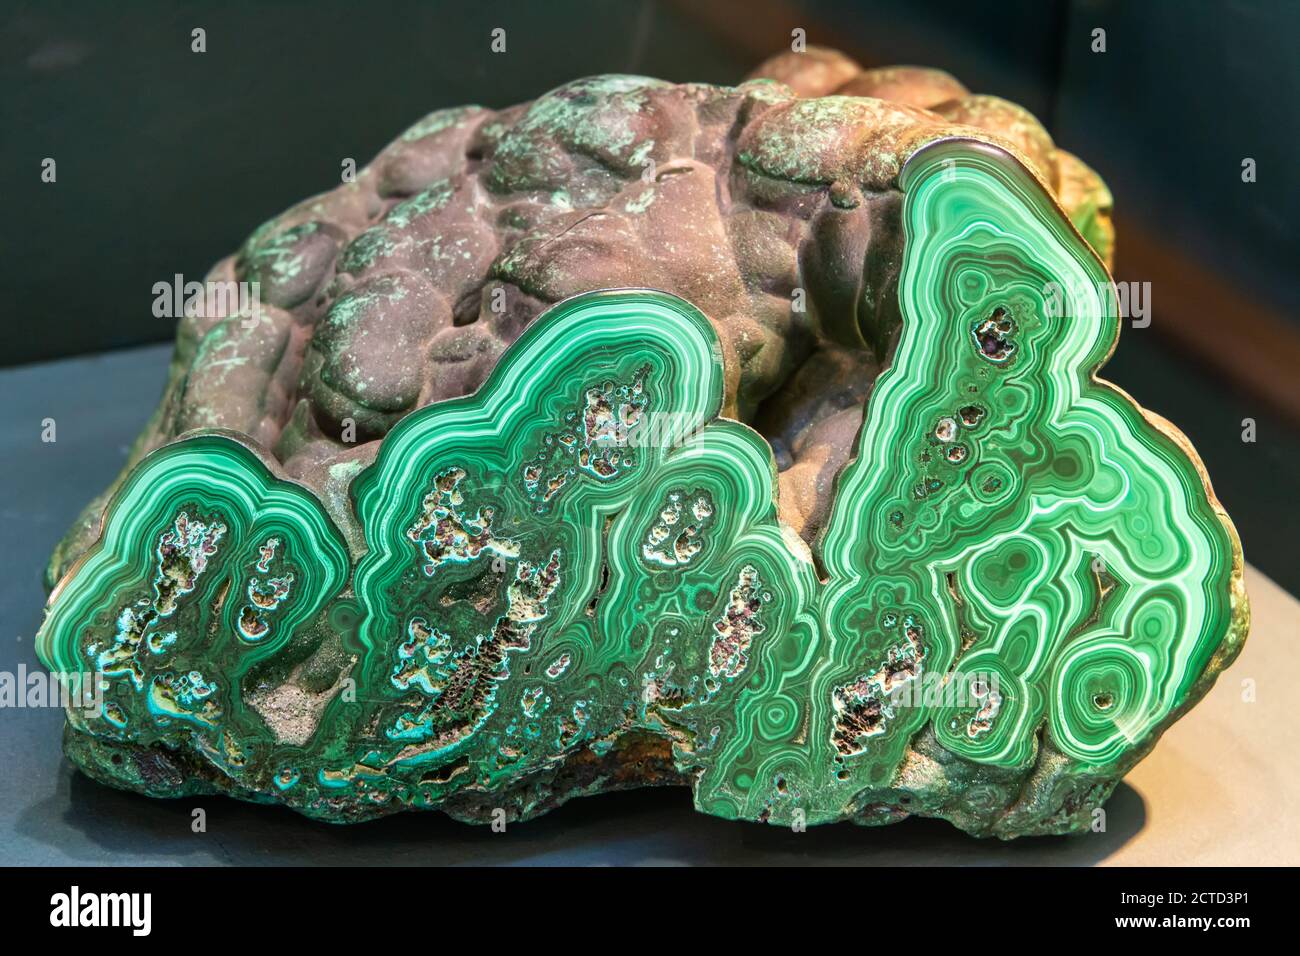 Sample of malachite, a copper carbonate hydroxide mineral. This sample was found in the Urals mountains of Russia. Stock Photo